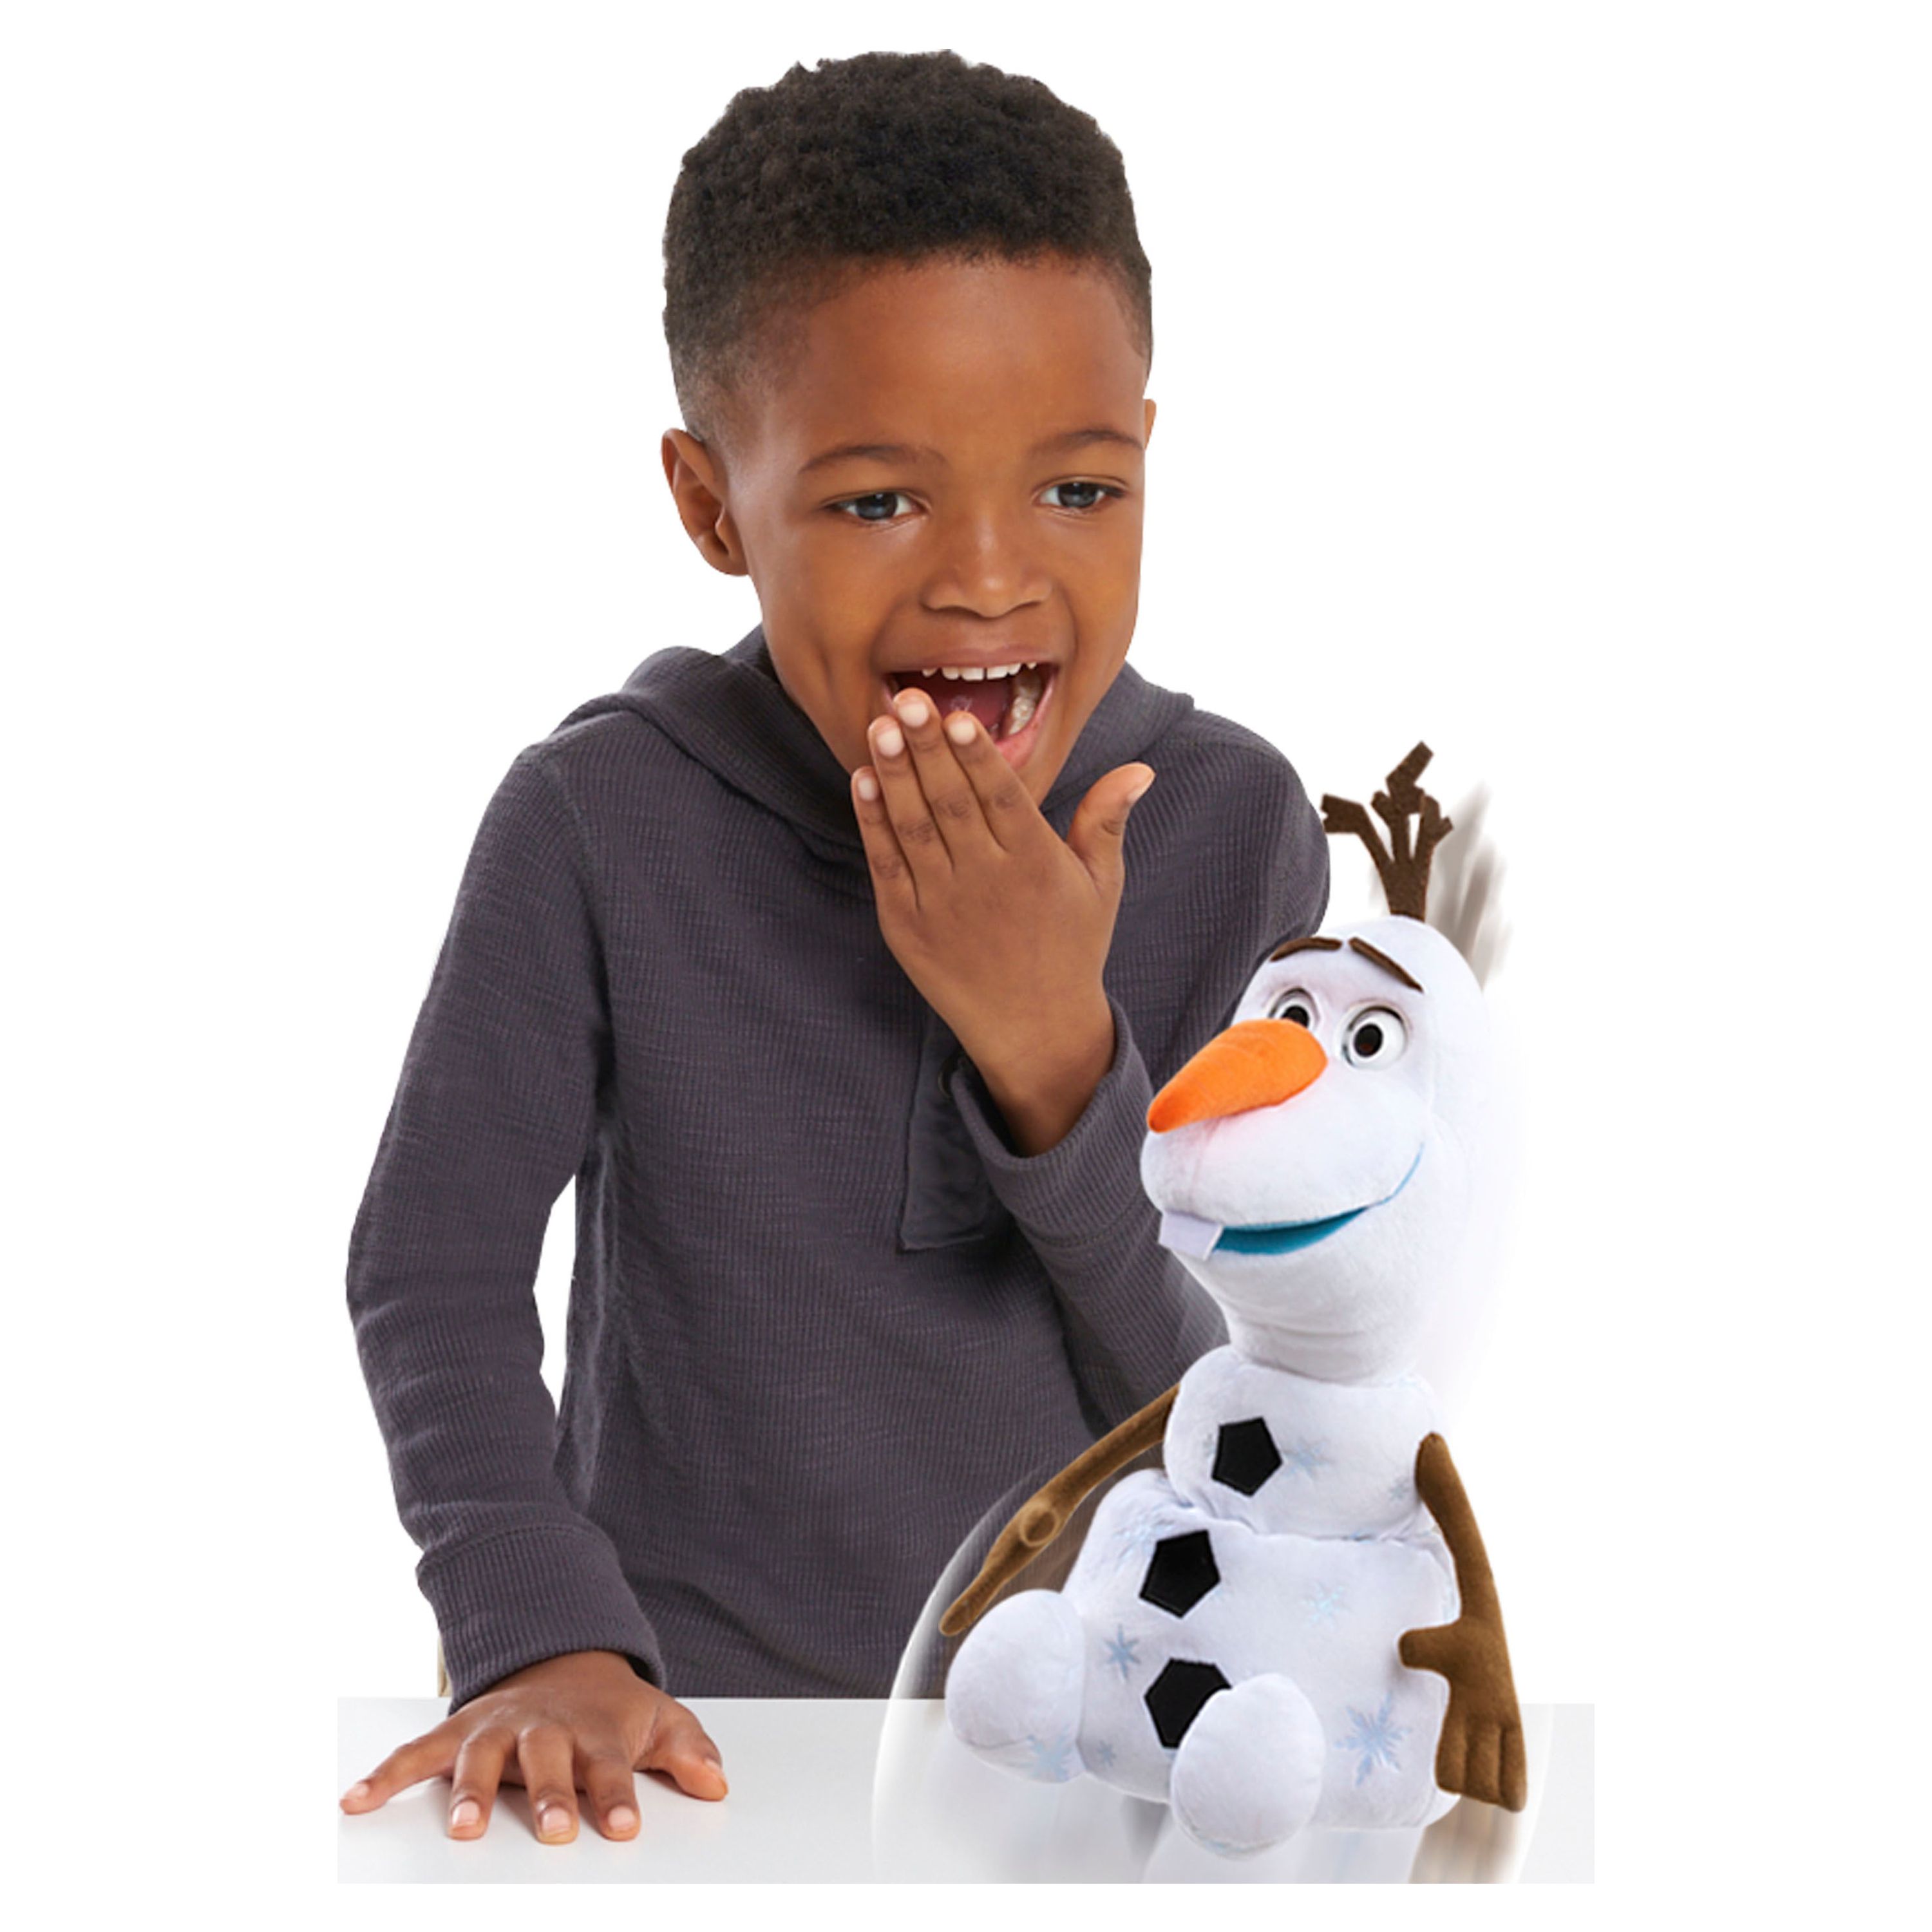 Disney Frozen 2 Spring & Surprise Olaf, Officially Licensed Kids Toys for Ages 3 Up, Gifts and Presents - image 3 of 4